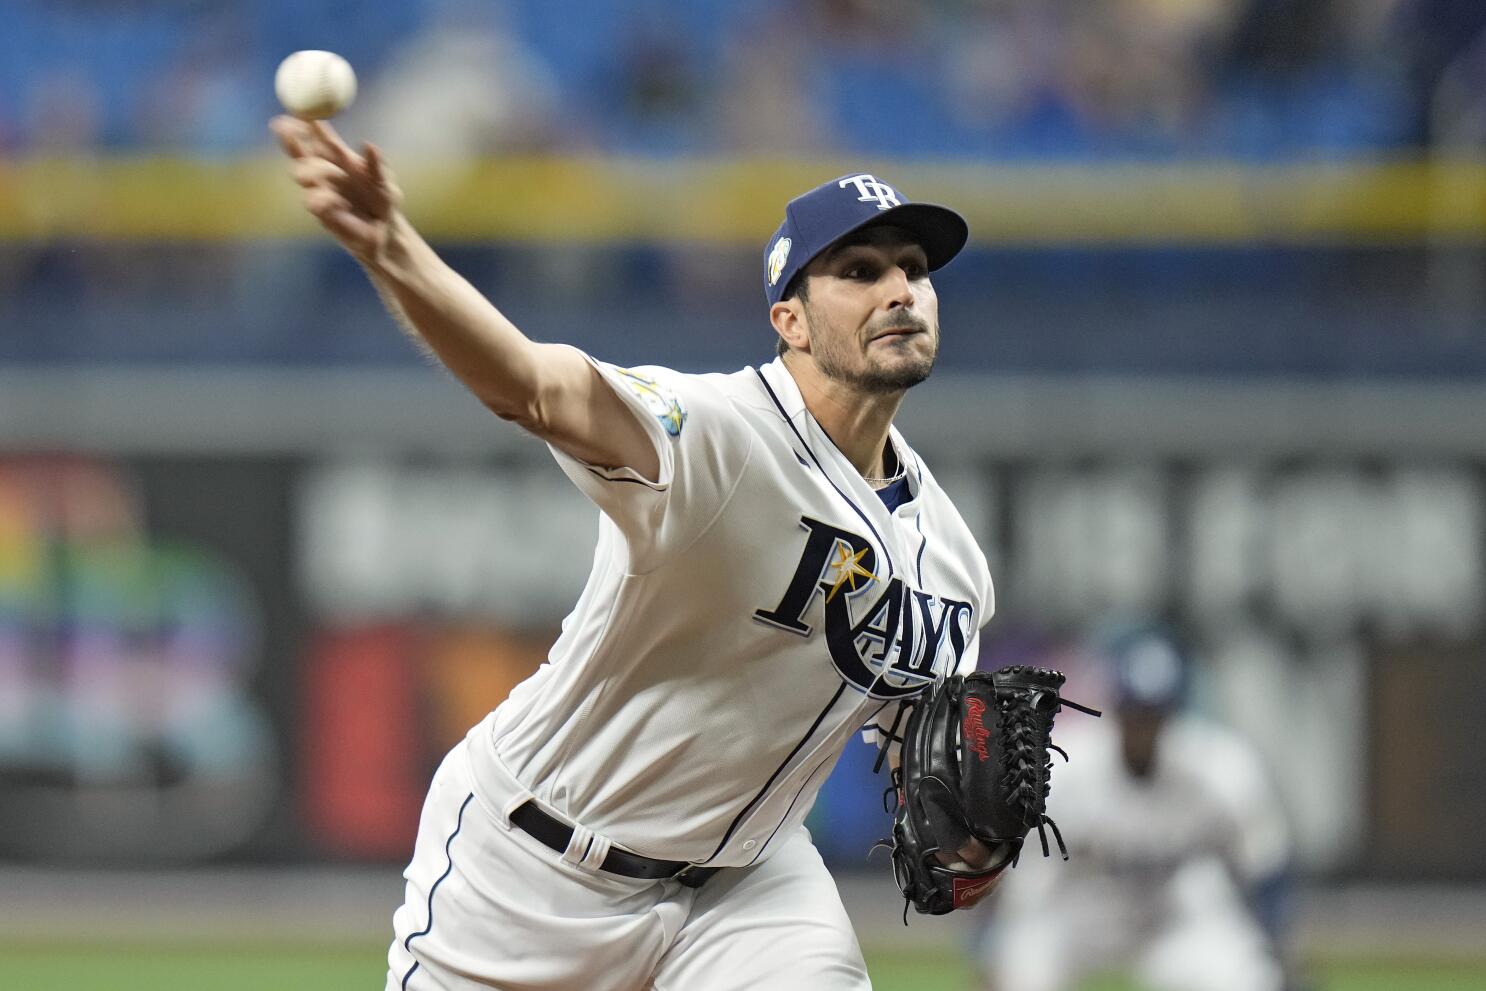 How Luke Raley 'looks really bad' but plays very well for the Rays